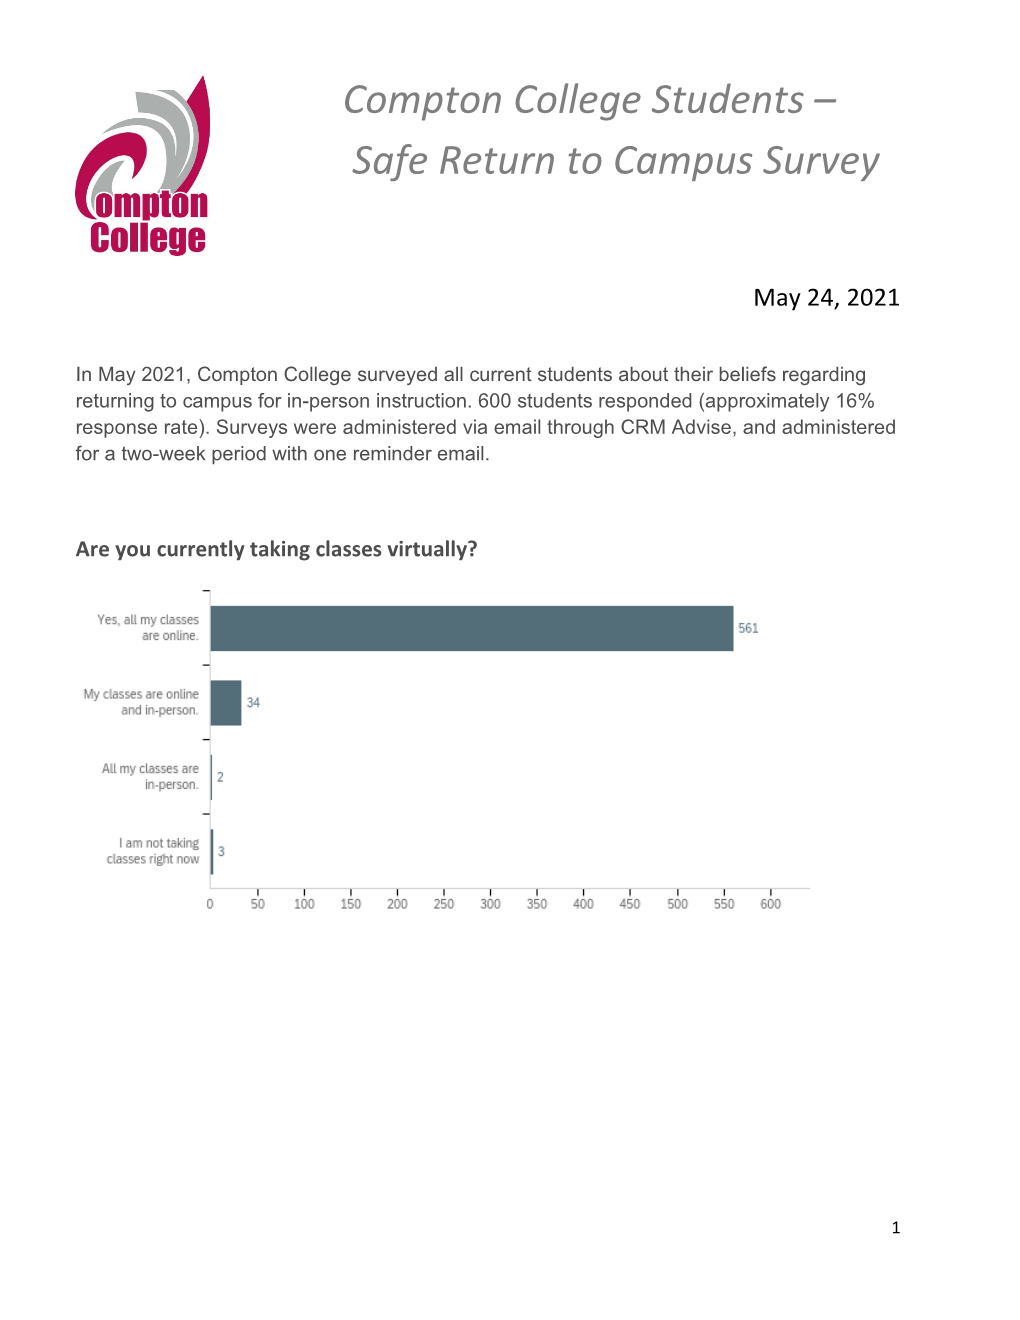 Compton College Students – Safe Return to Campus Survey